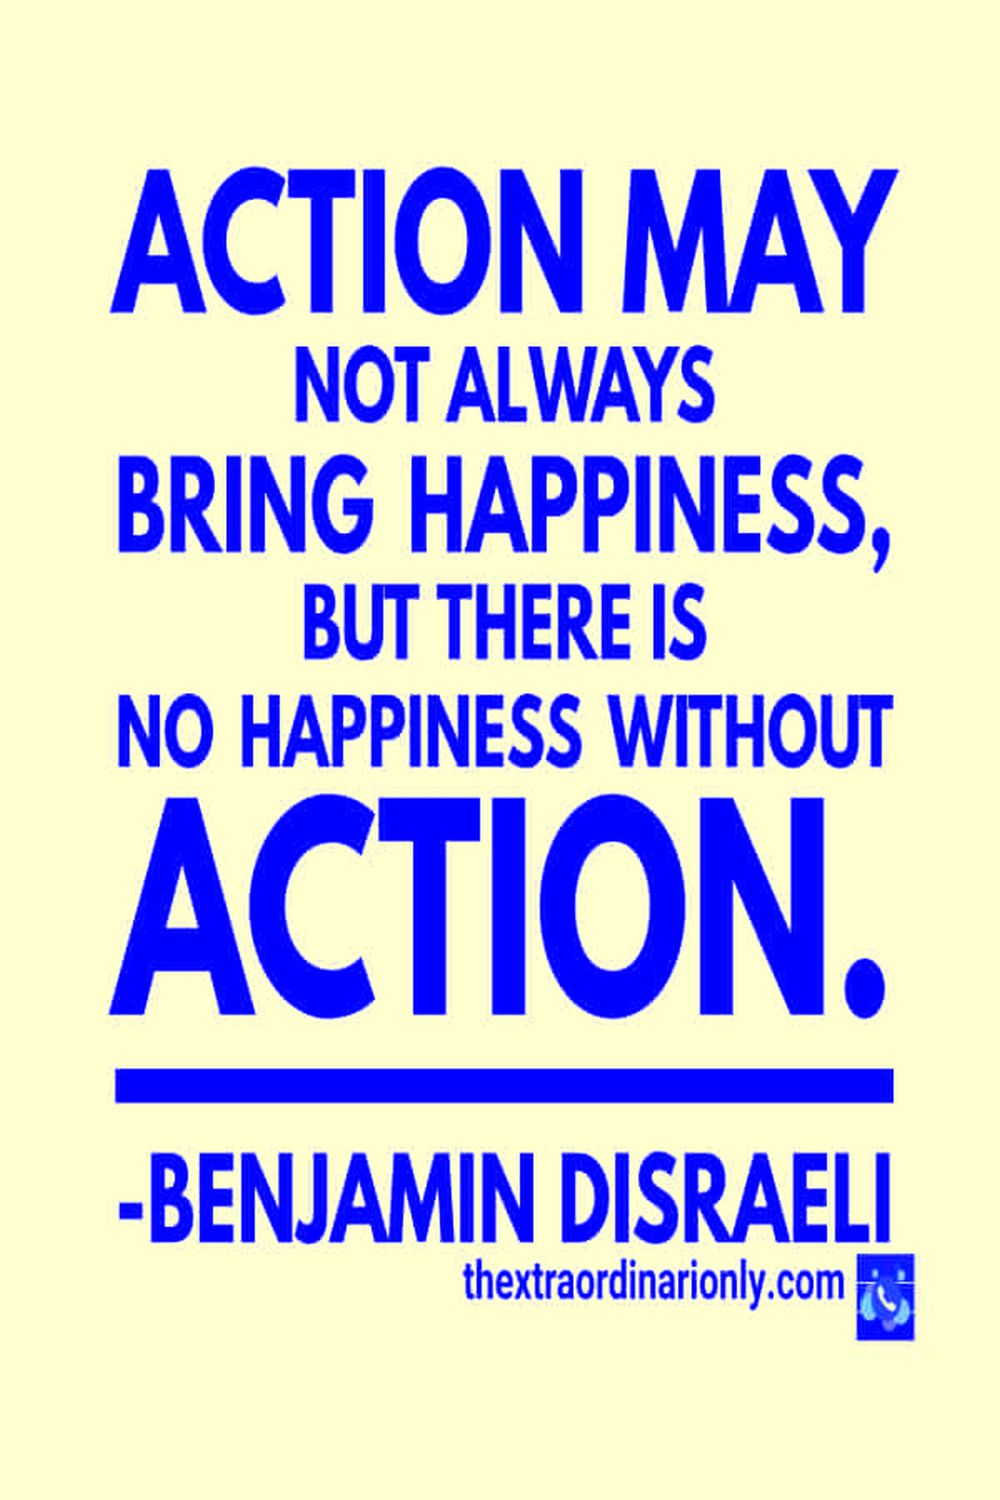 Volunteering quote: There is no happiness without action (Benjamin Israel)